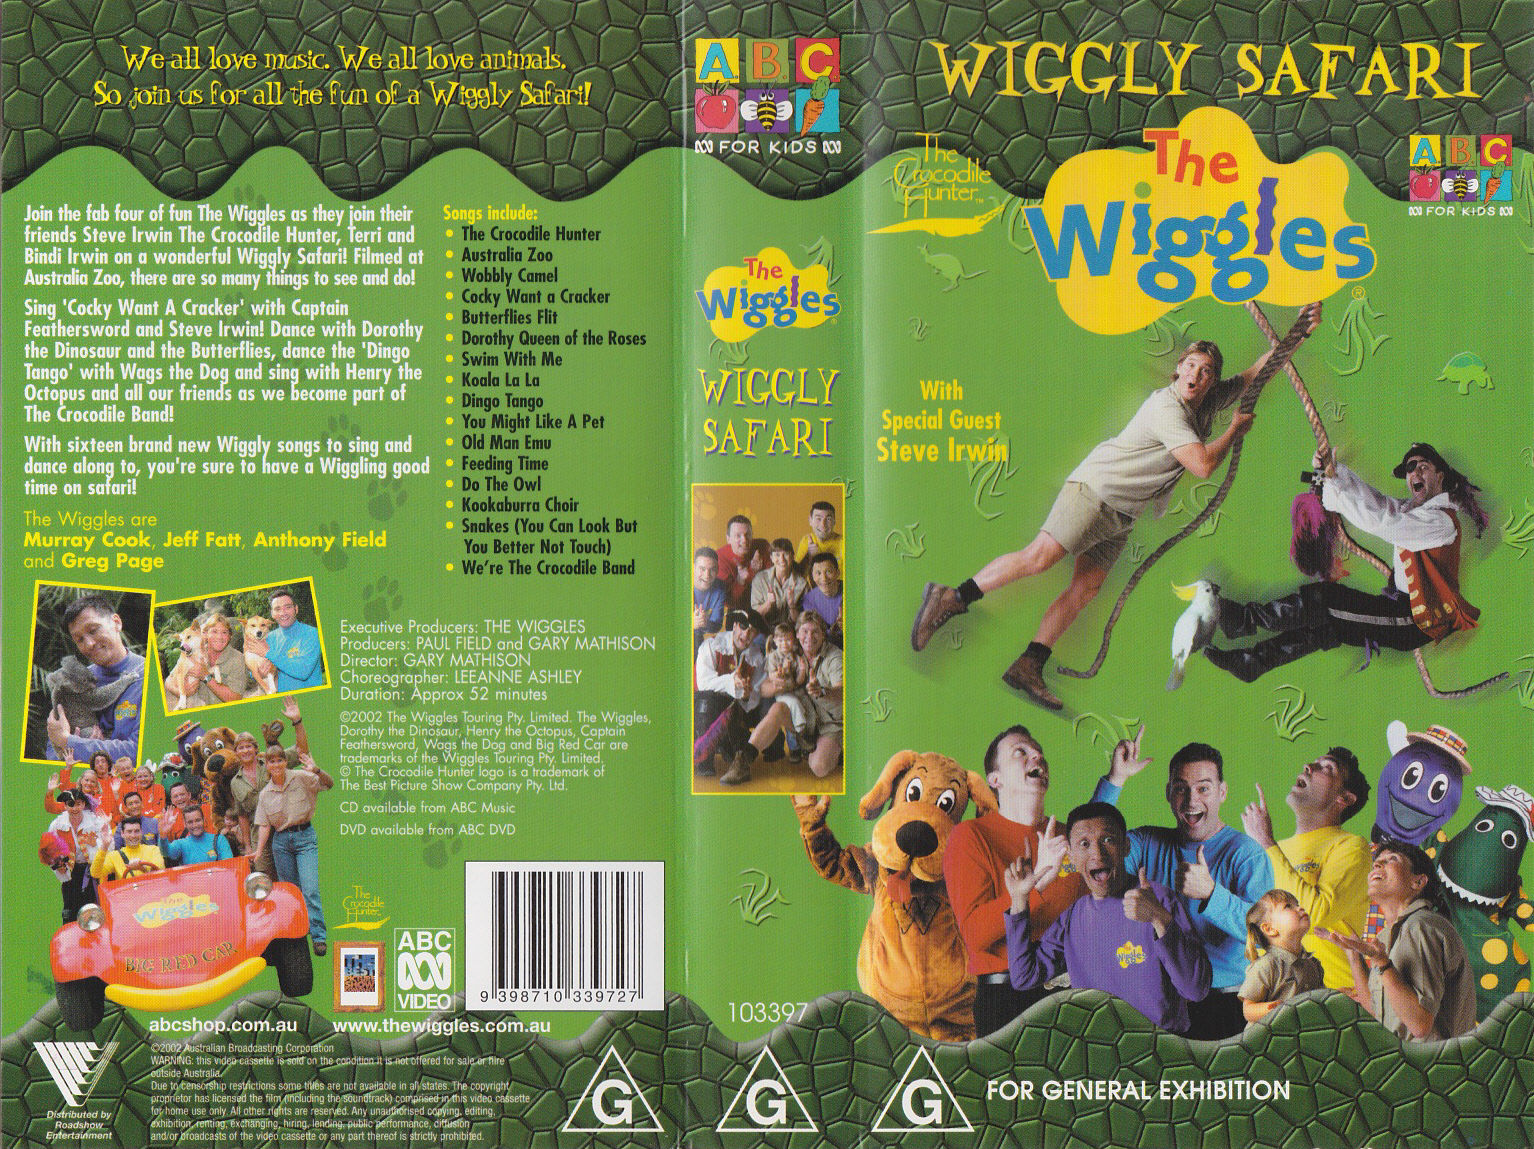 A look at all home video releases of "Wiggly Safari"